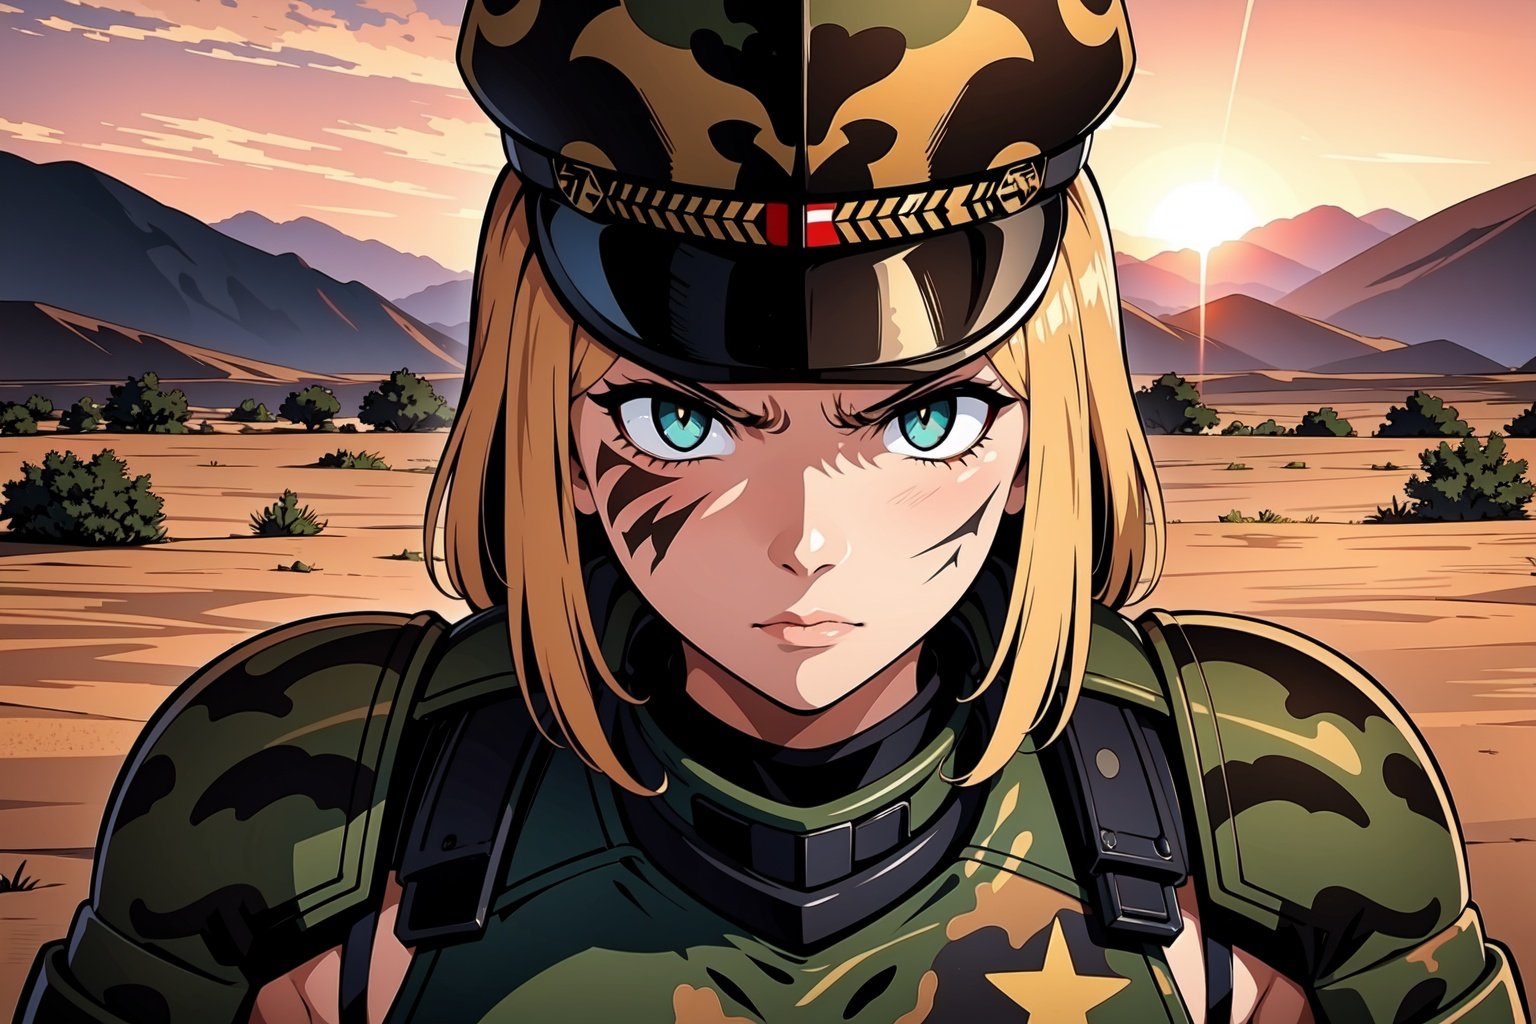 best quality,ultra-detailed,portraits,gritty,desert camouflage,serious expression,harsh lighting,steely gaze,thousand-yard stare,detailed insignia,confident posture,military cap,combat boots,camouflaged face paint,dust and debris,fading sunset colors,weathered armor,scars,smoke and gunfire,battlefield chaos.